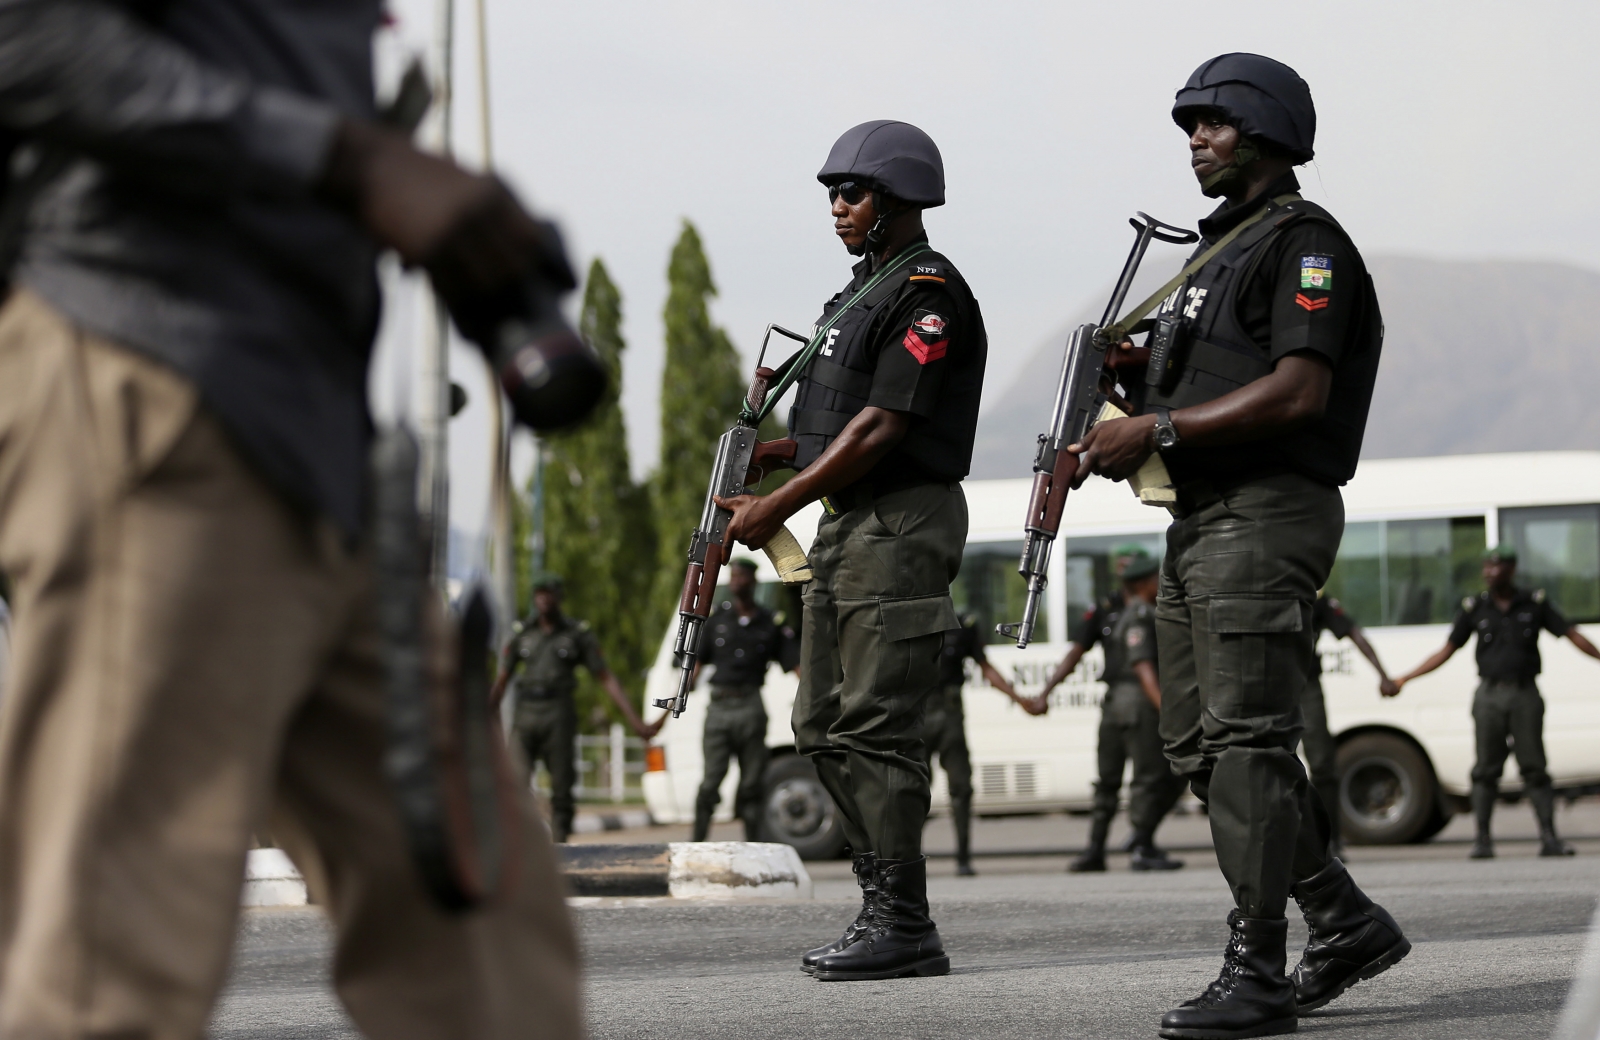 Nigeria Police reacts to reports of bombs in Abuja, insists no imminent threat